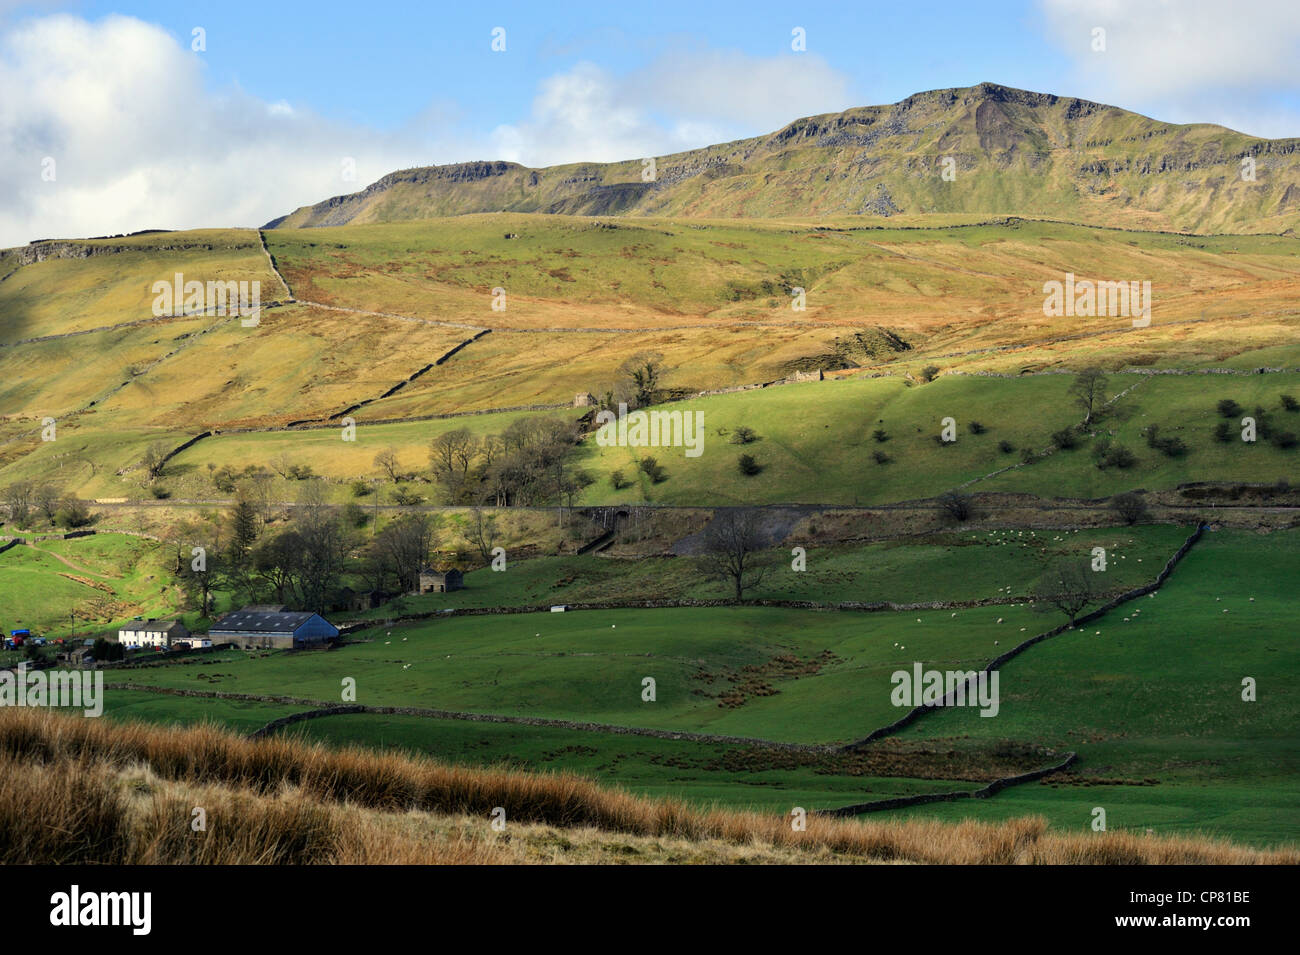 Hill Hall Farm, Swarth Fell and Wild Boar Fell. Mallerstang, Yorkshire Dales National Park, Cumbria, England, United Kingdom. Stock Photo